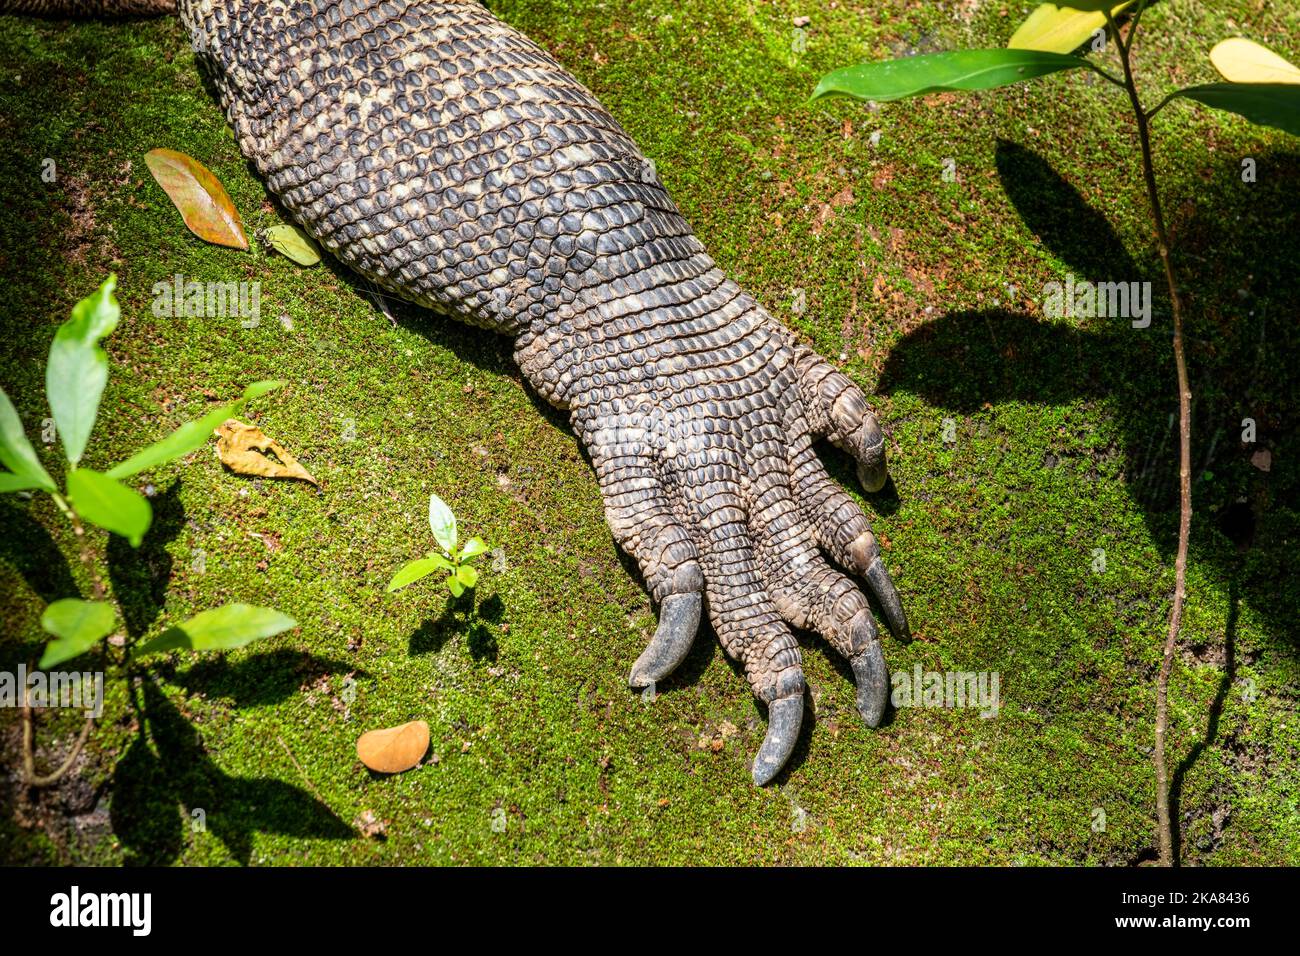 The closeup image of Komodo dragon's front leg claw.  it is also known as the Komodo monitor, a species of lizard found in the Indonesian islands Stock Photo